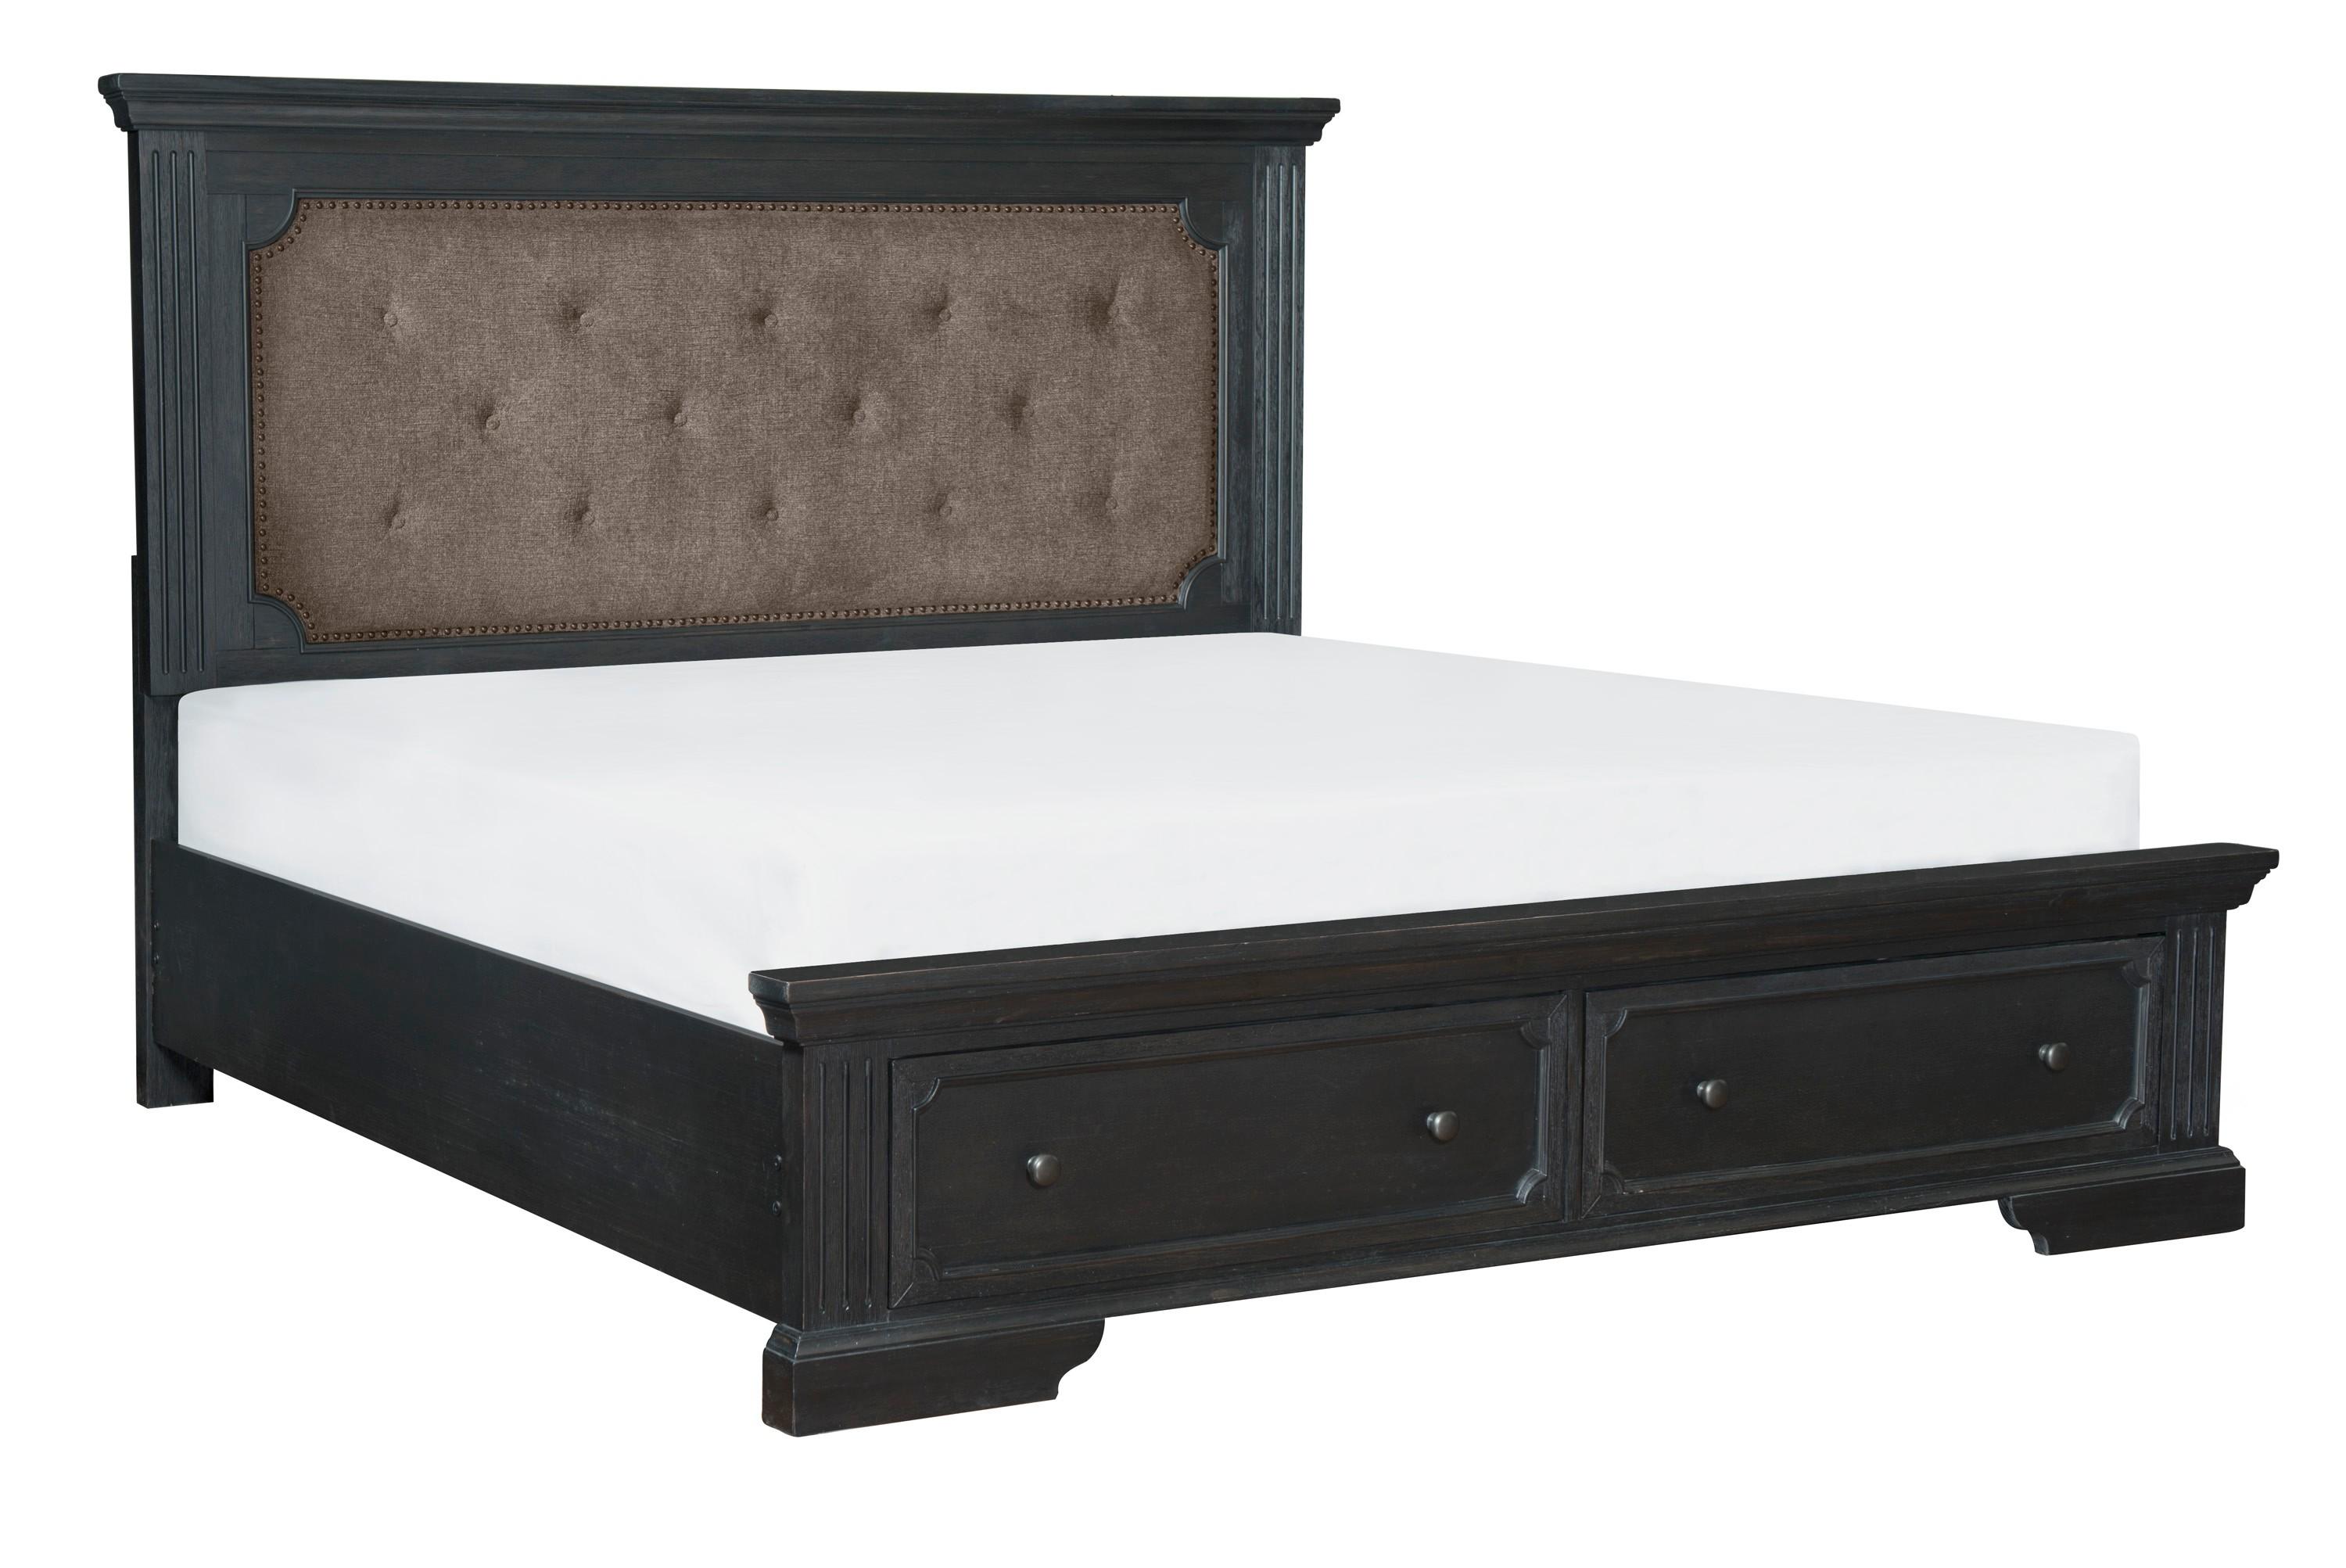 Rustic Bed 1647K-1CK* Bolingbrook 1647K-1CK* in Charcoal Polyester